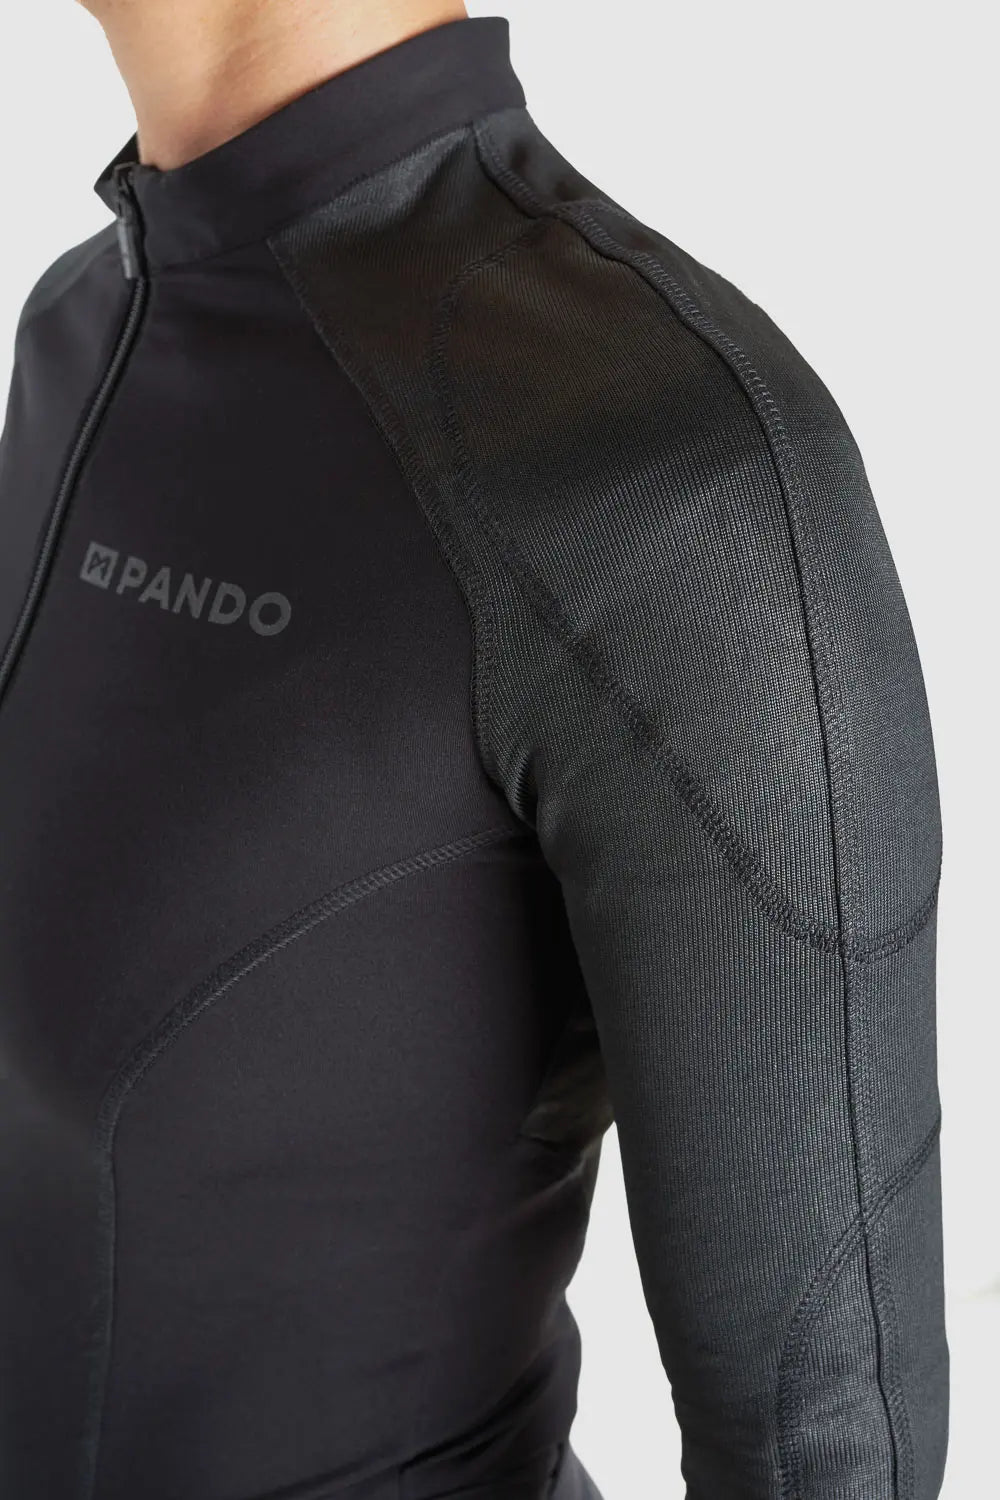 A close up of the shoulder of Pando Moto Armored motorcycle long-sleeve bodysuit base layer for women